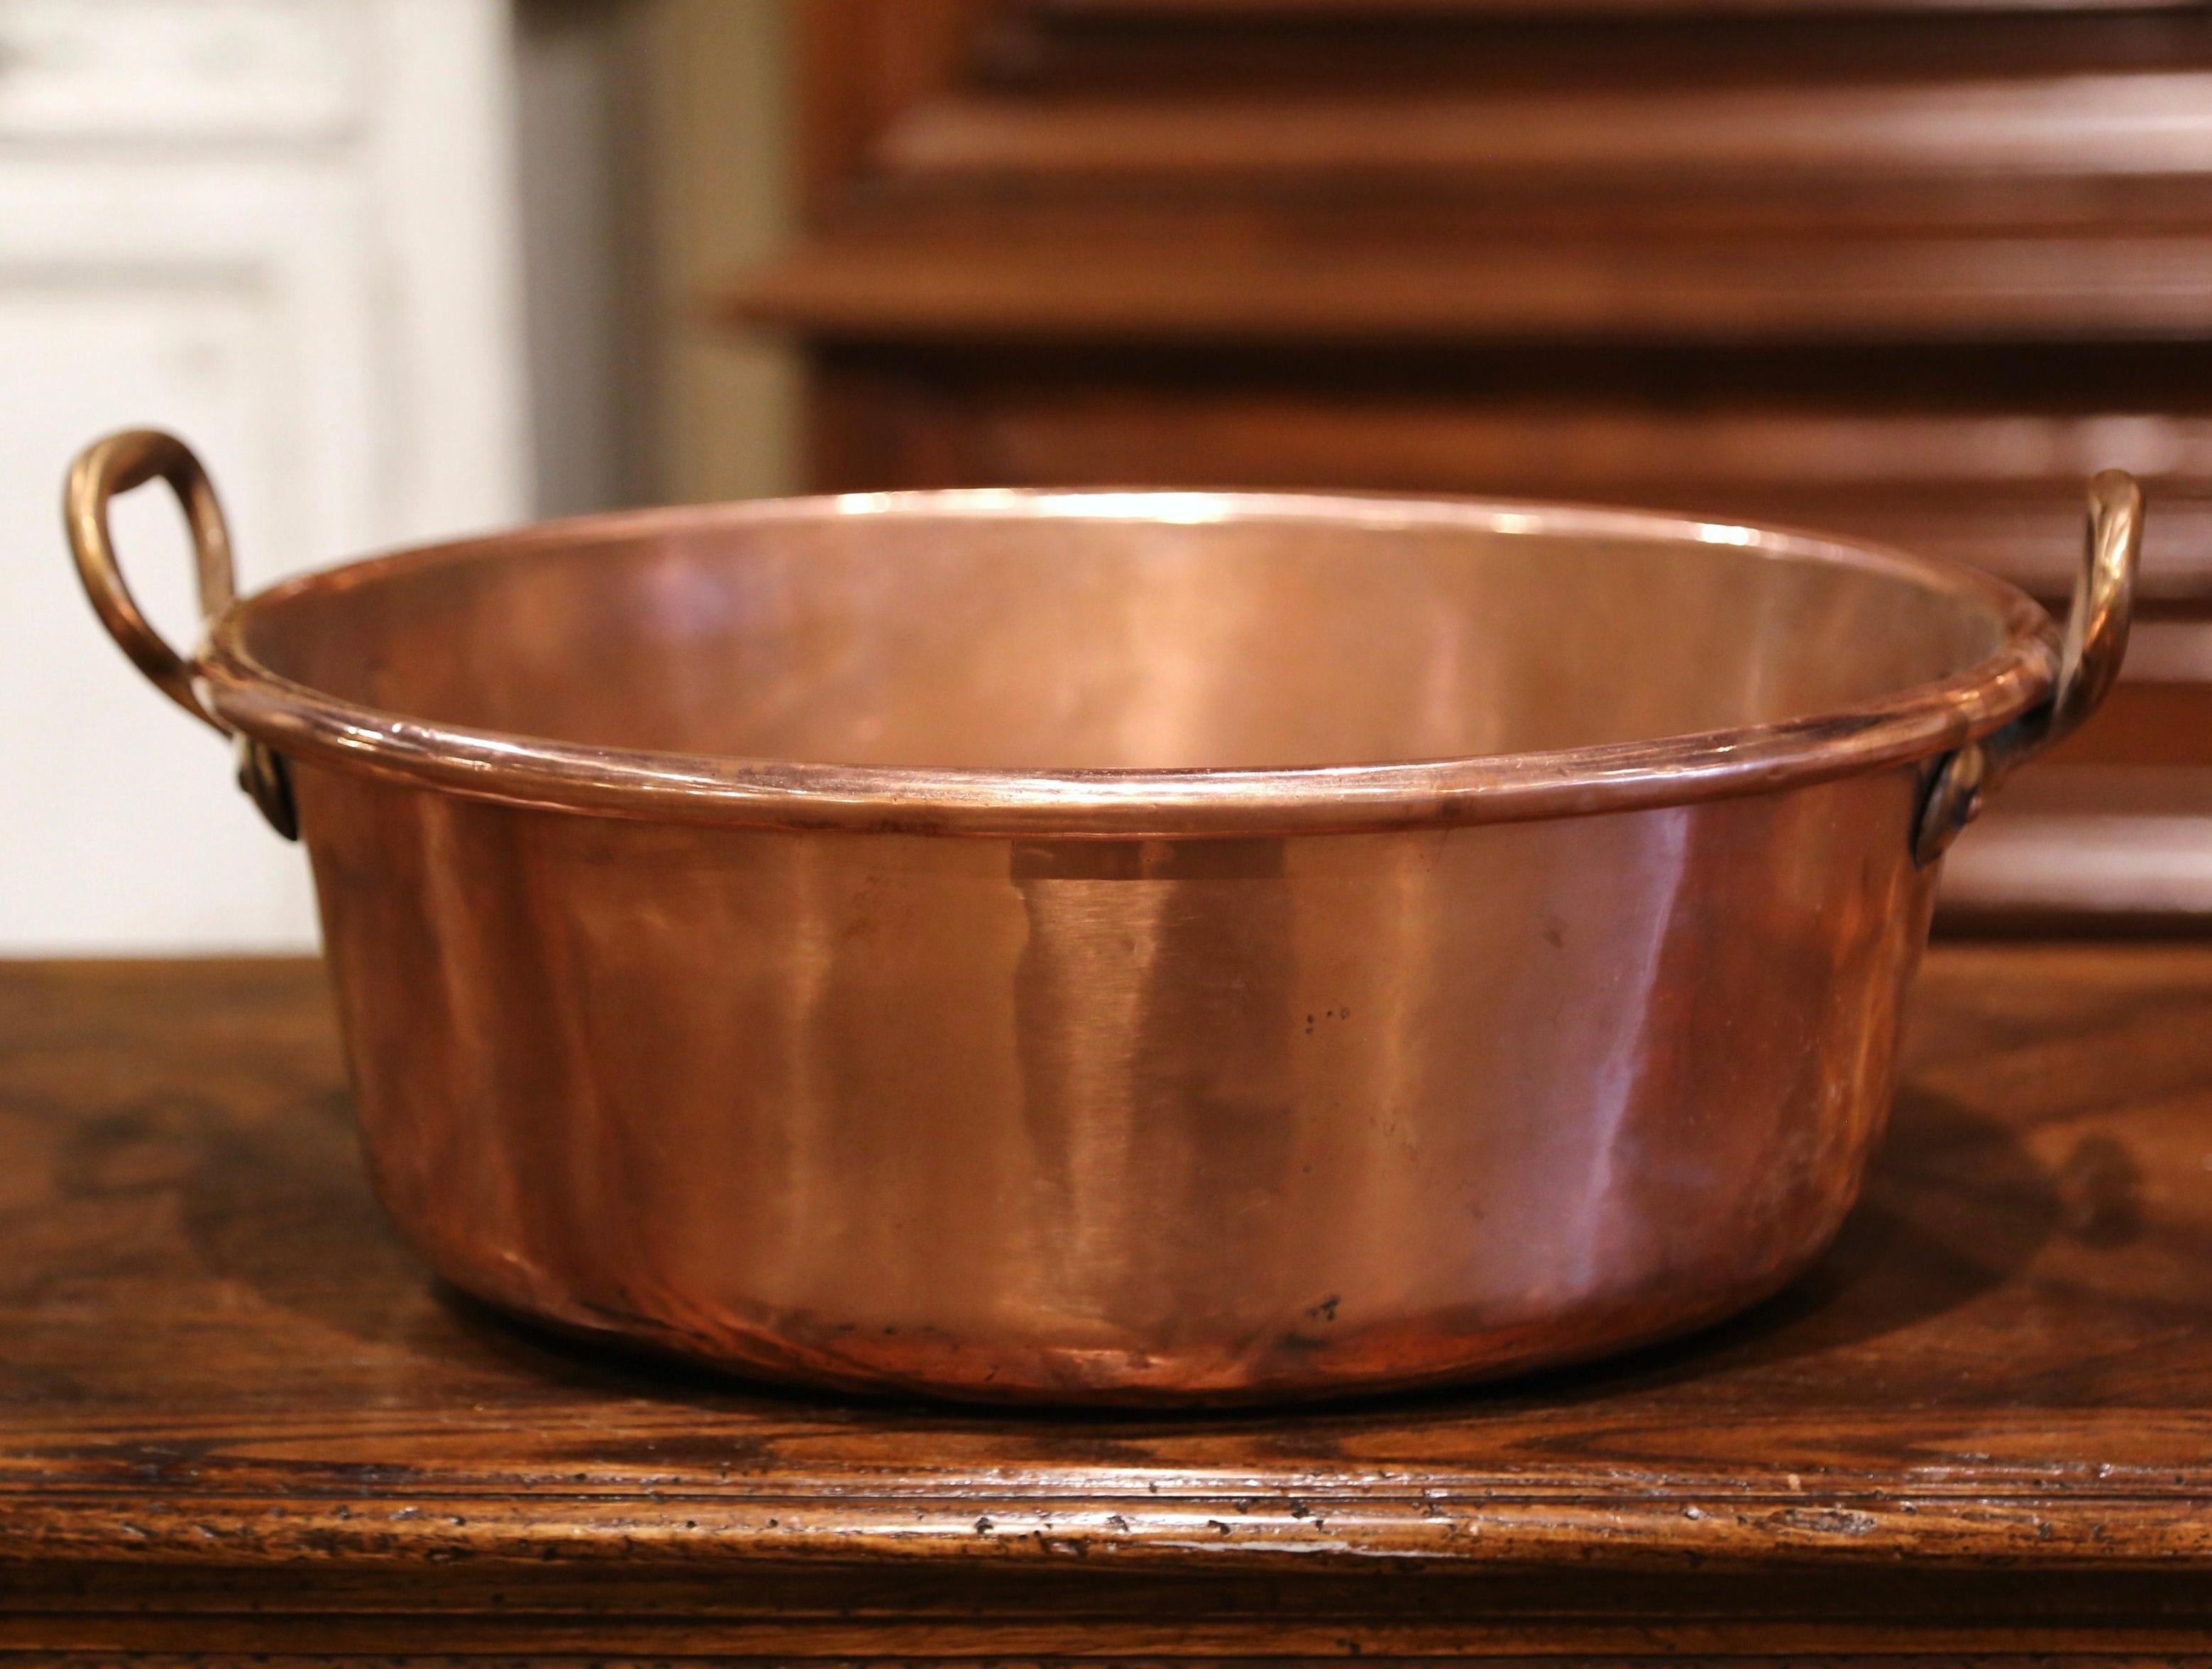 Hand-Crafted Mid-19th Century French Copper and Brass Jelly Boiling Bowl with Handles